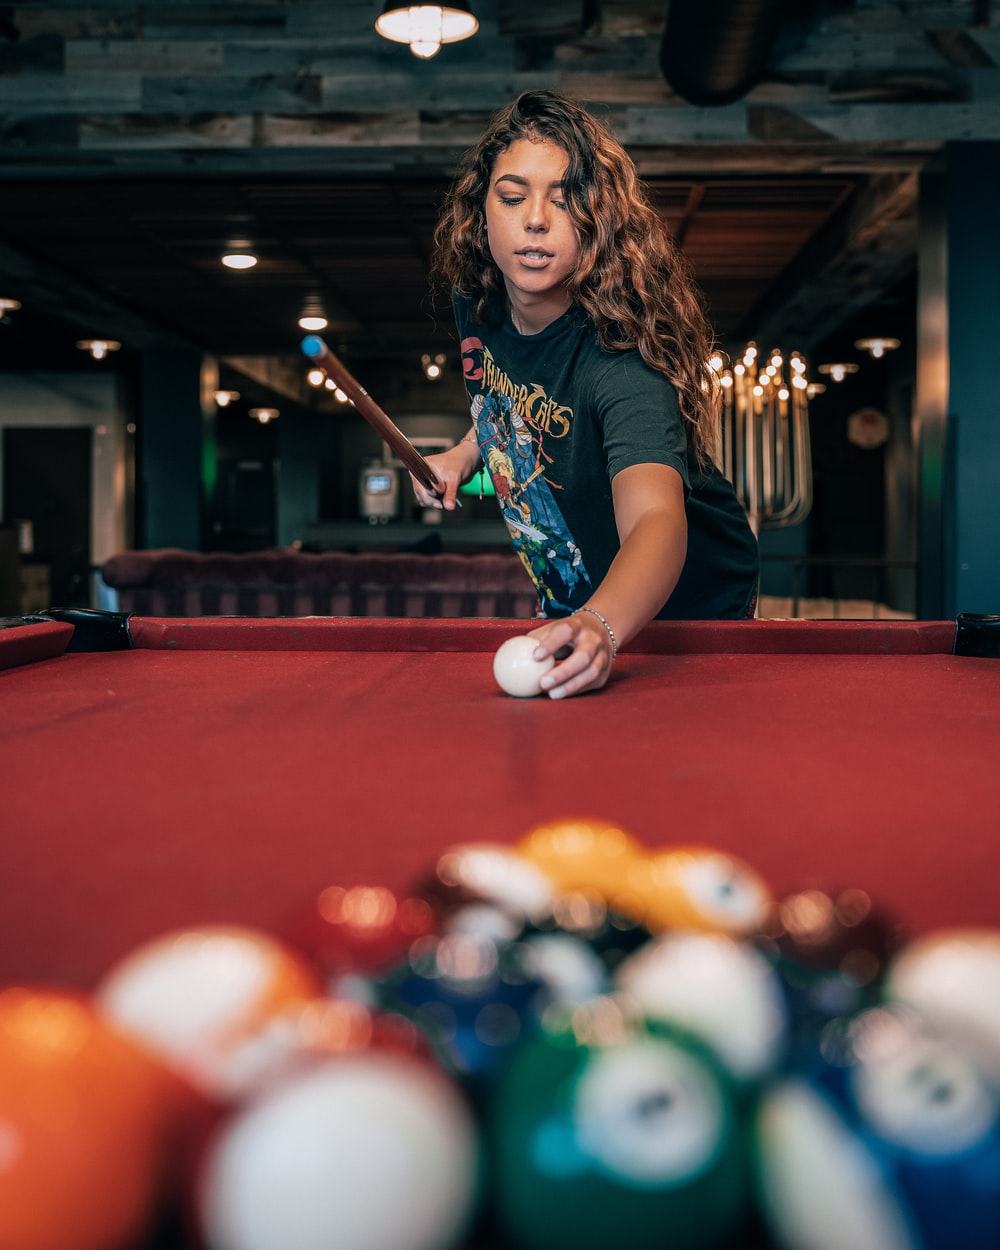 Pool Game Picture. Download Free Image